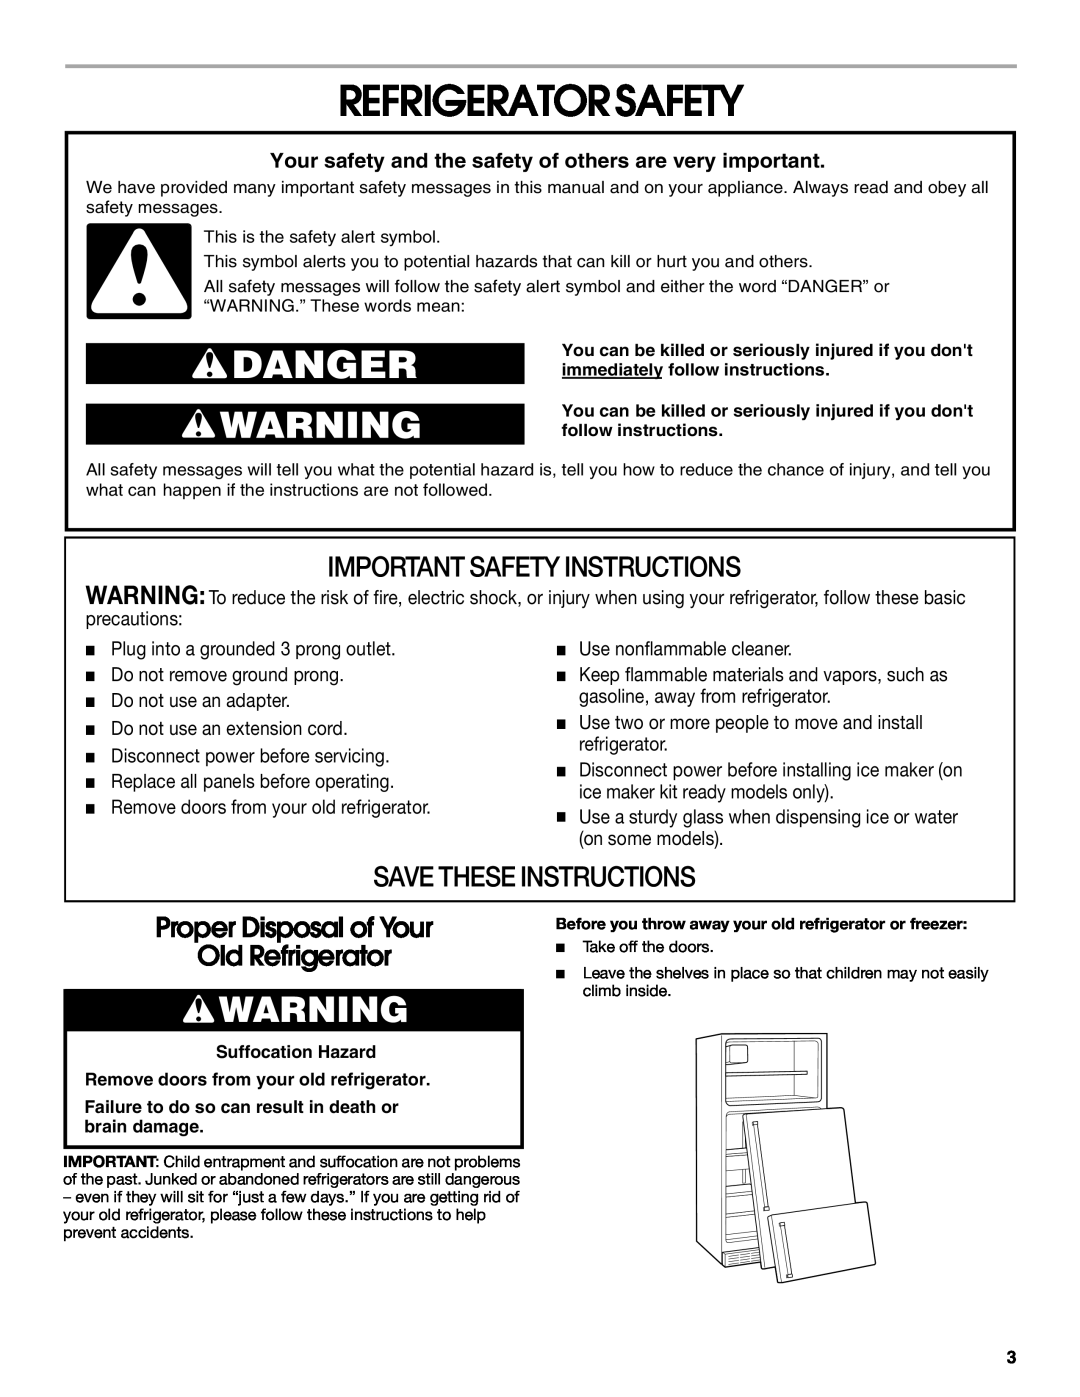 Whirlpool ST18PKXJW00 manual Refrigerator Safety, Important Safety Instructions, Save These Instructions 